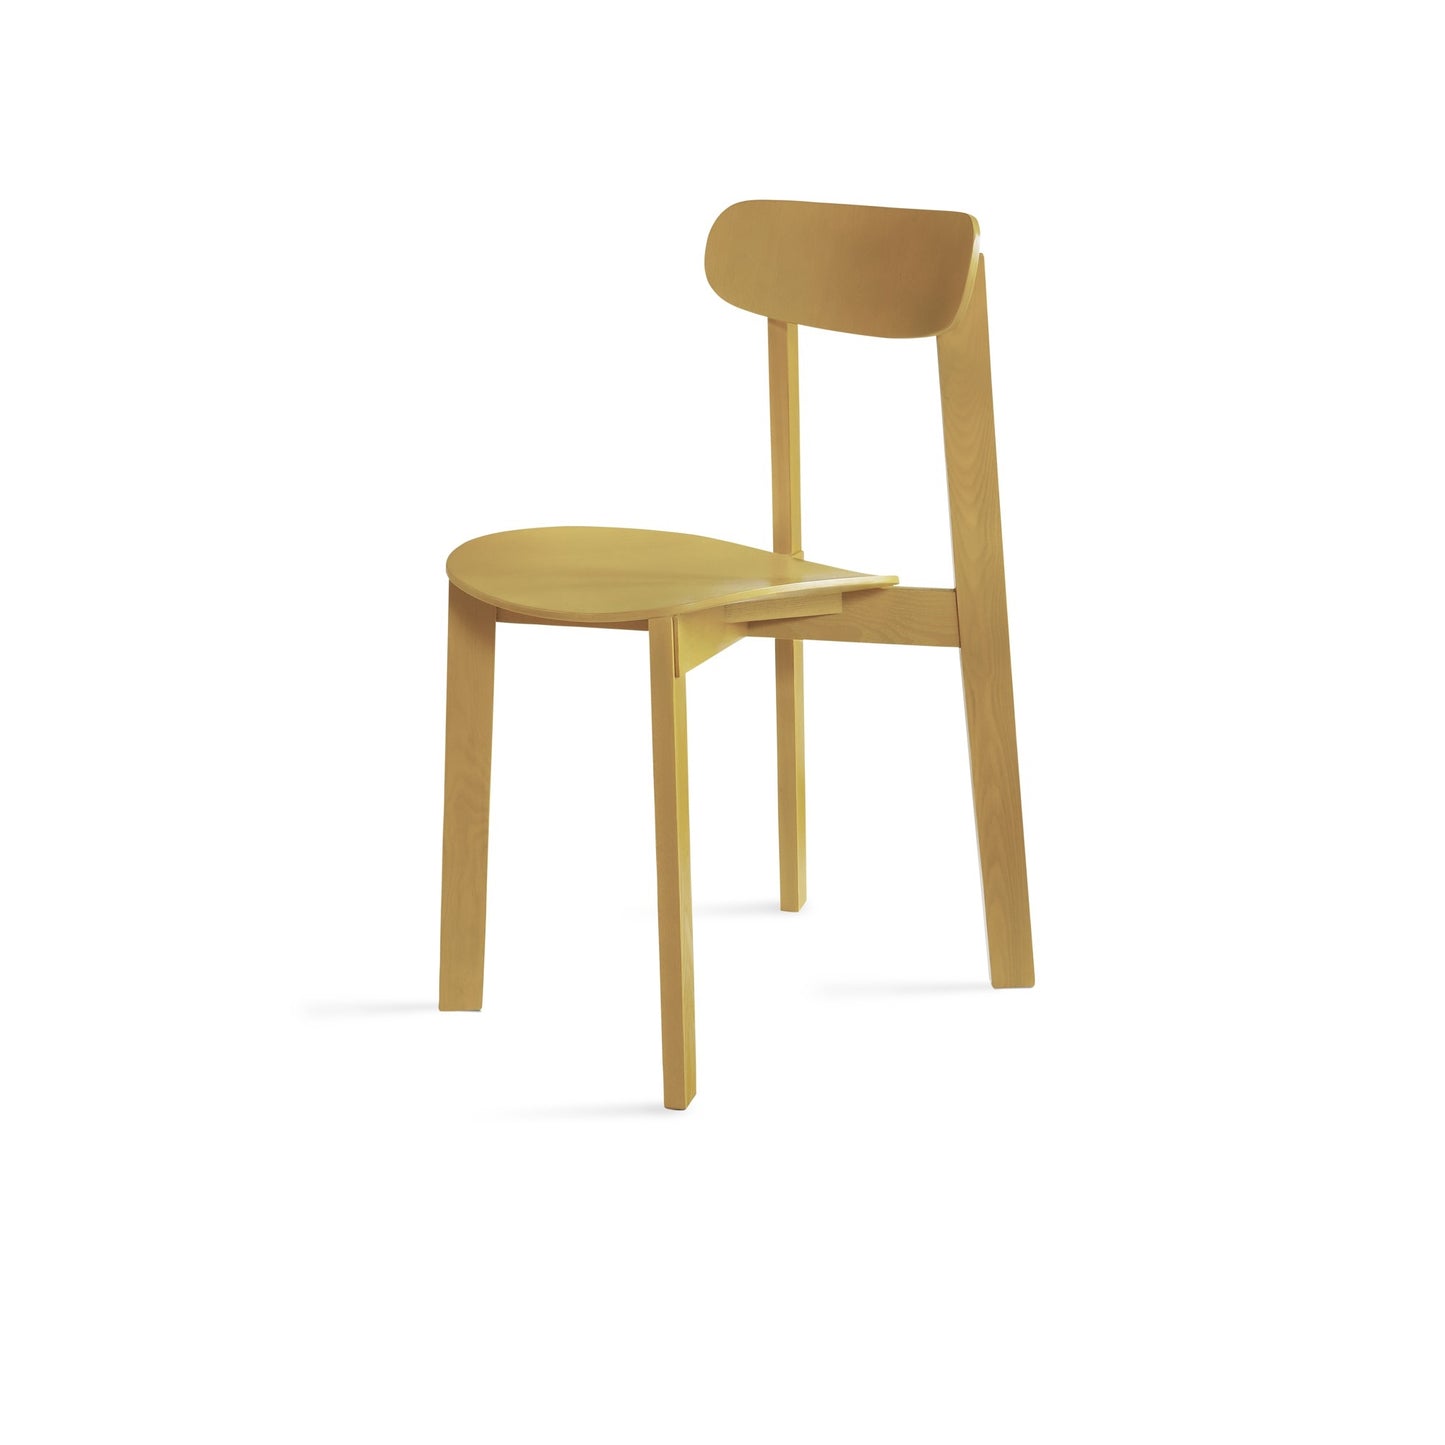 Bondi Dining Chair by Please wait to be seated #Turmeric Yellow